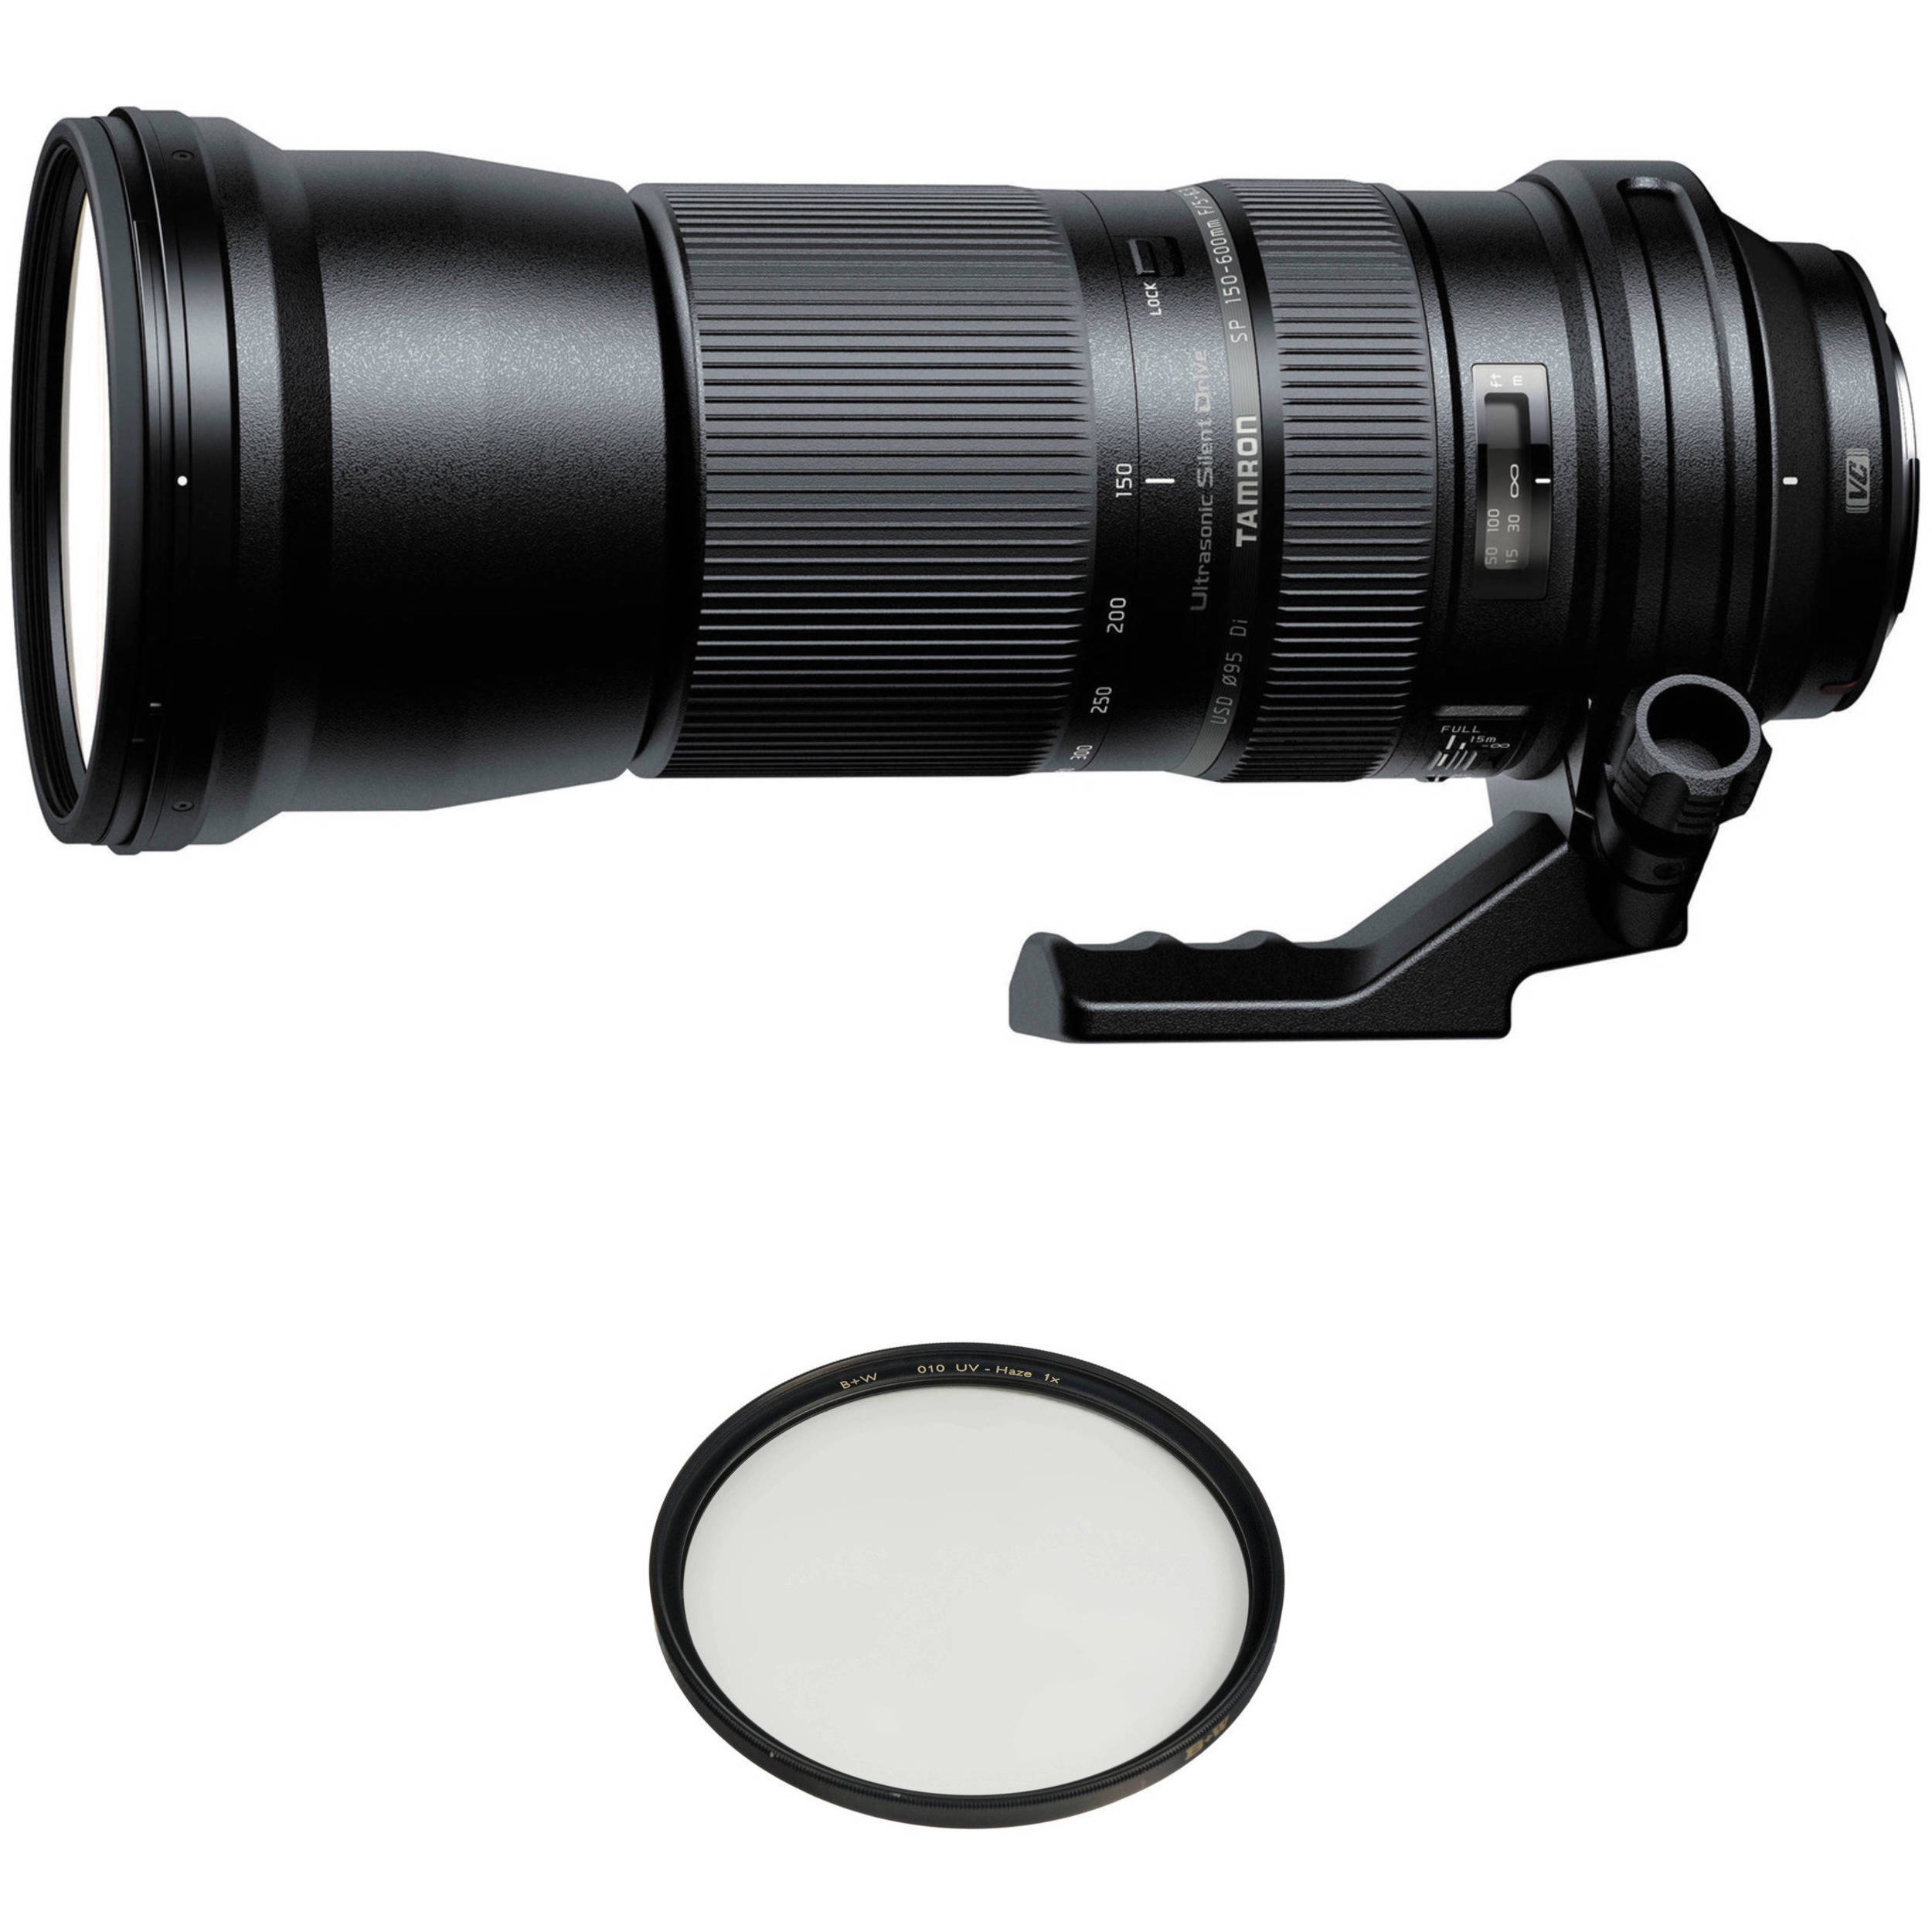 Sp 150 600mm f 5 63 di vc usd sony Tamron Sp 150 600mm F 5 6 3 Di Usd Lens And Filter Kit For Sony